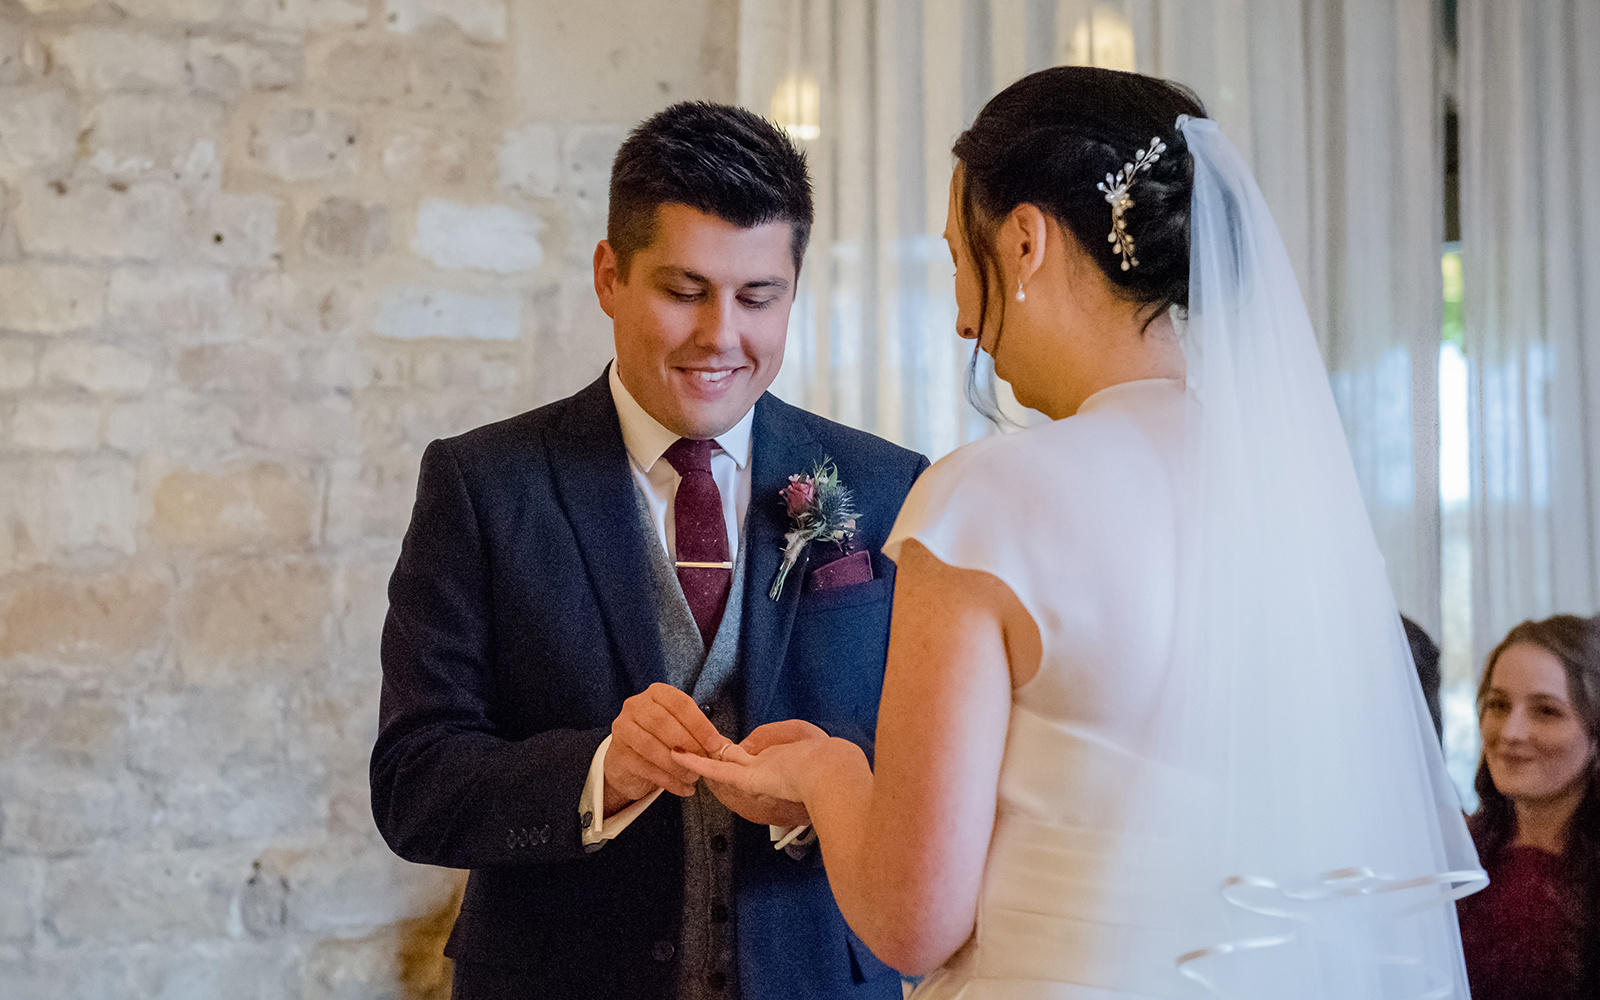 Capture Every Moment wedding photography duo from Cirencester reportage traditional photographers Lapstone Barn Chipping Campden Cotswolds venue Bride Groom exchange rings